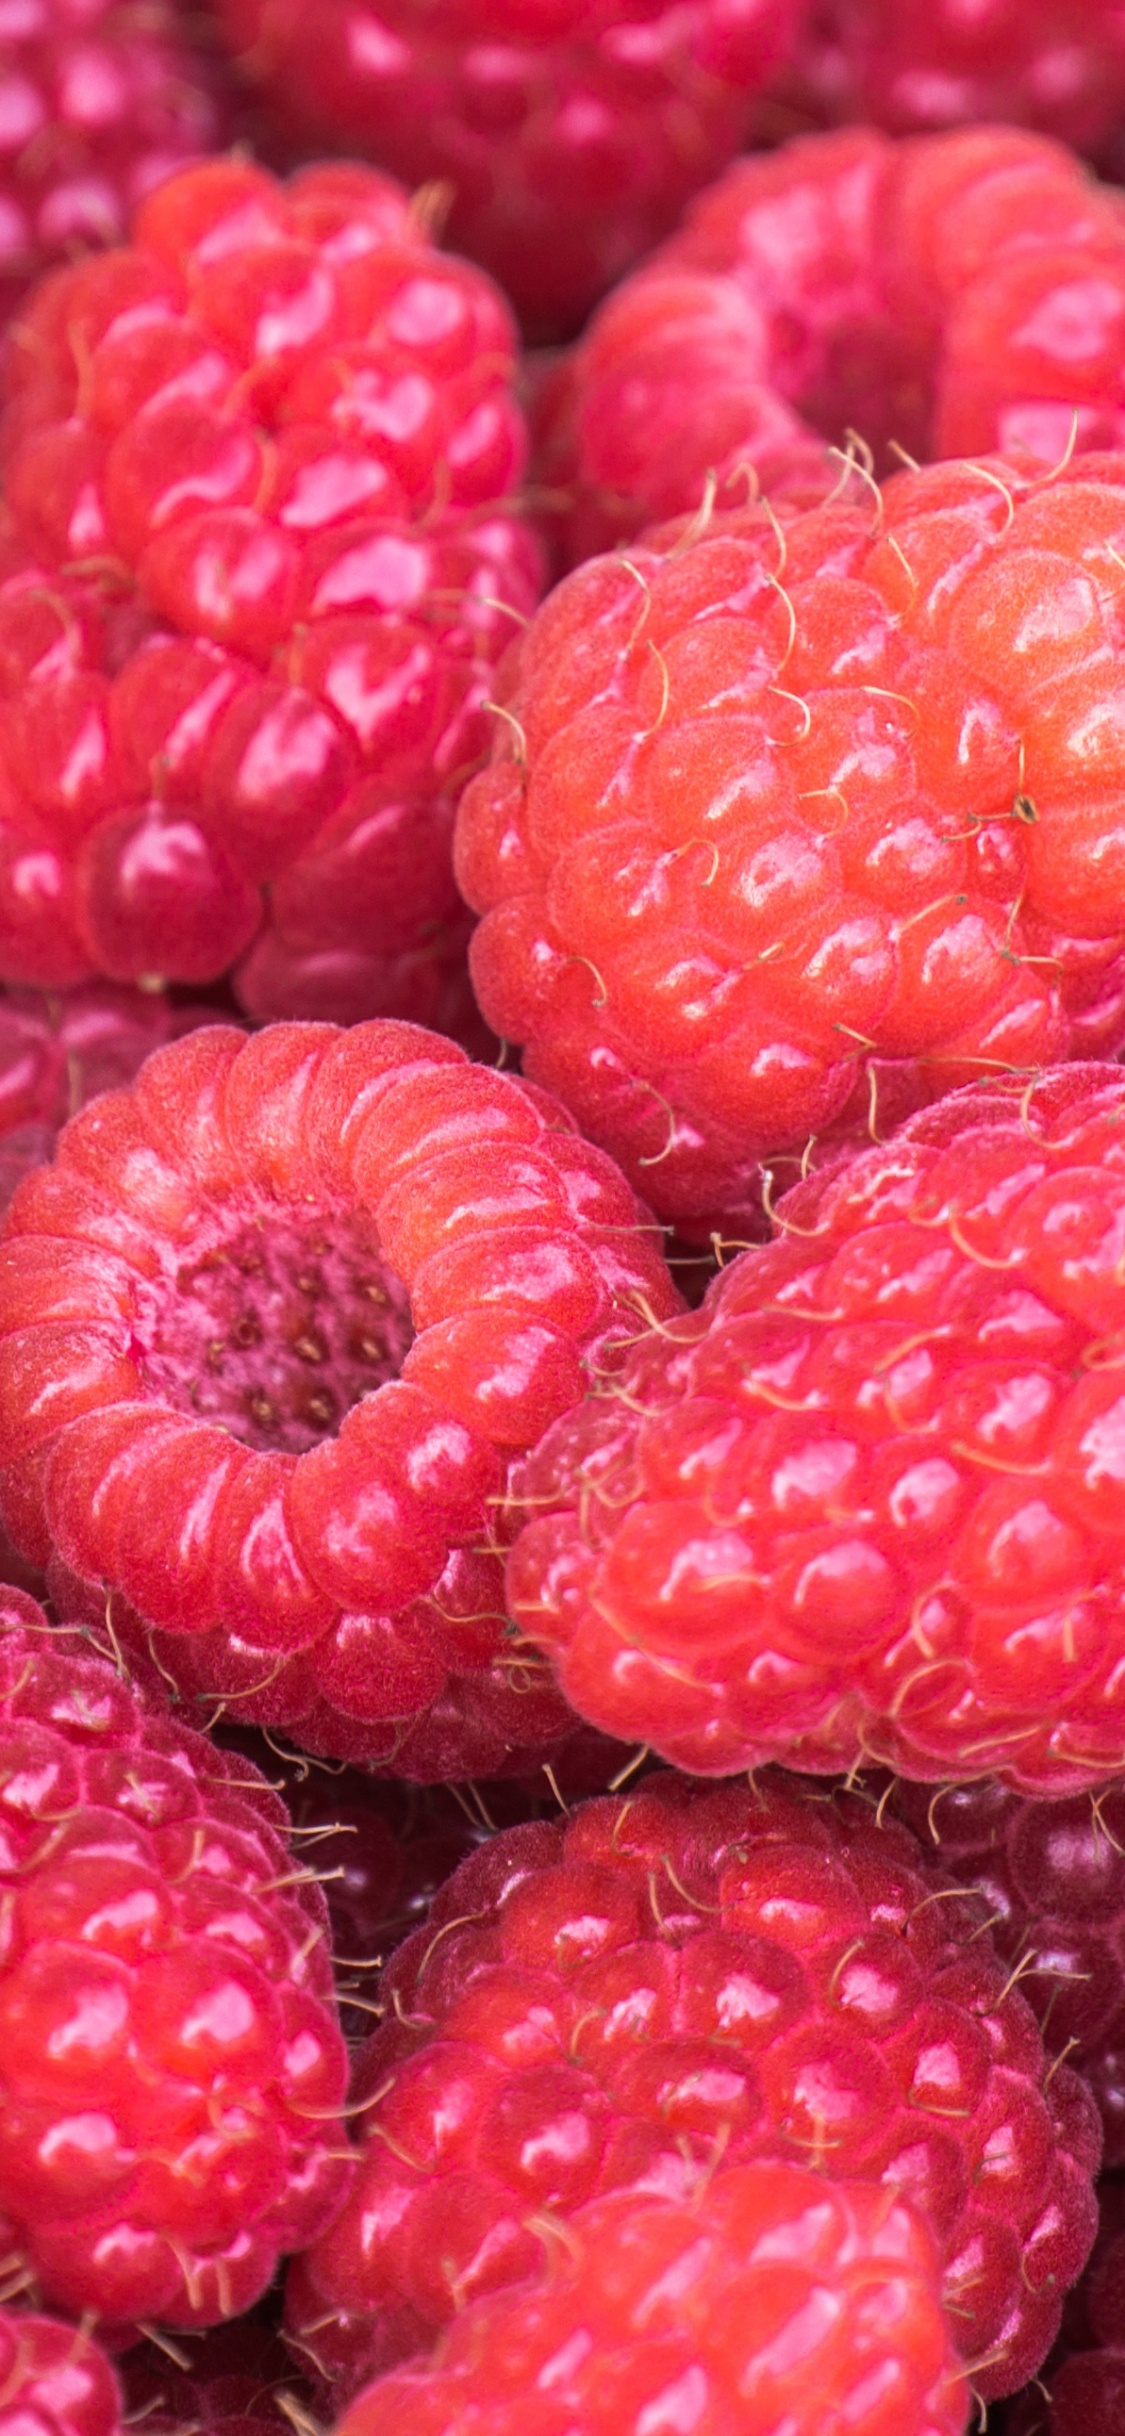 Red Raspberry Fruits in Close up Photography. Wallpaper in 1125x2436 Resolution